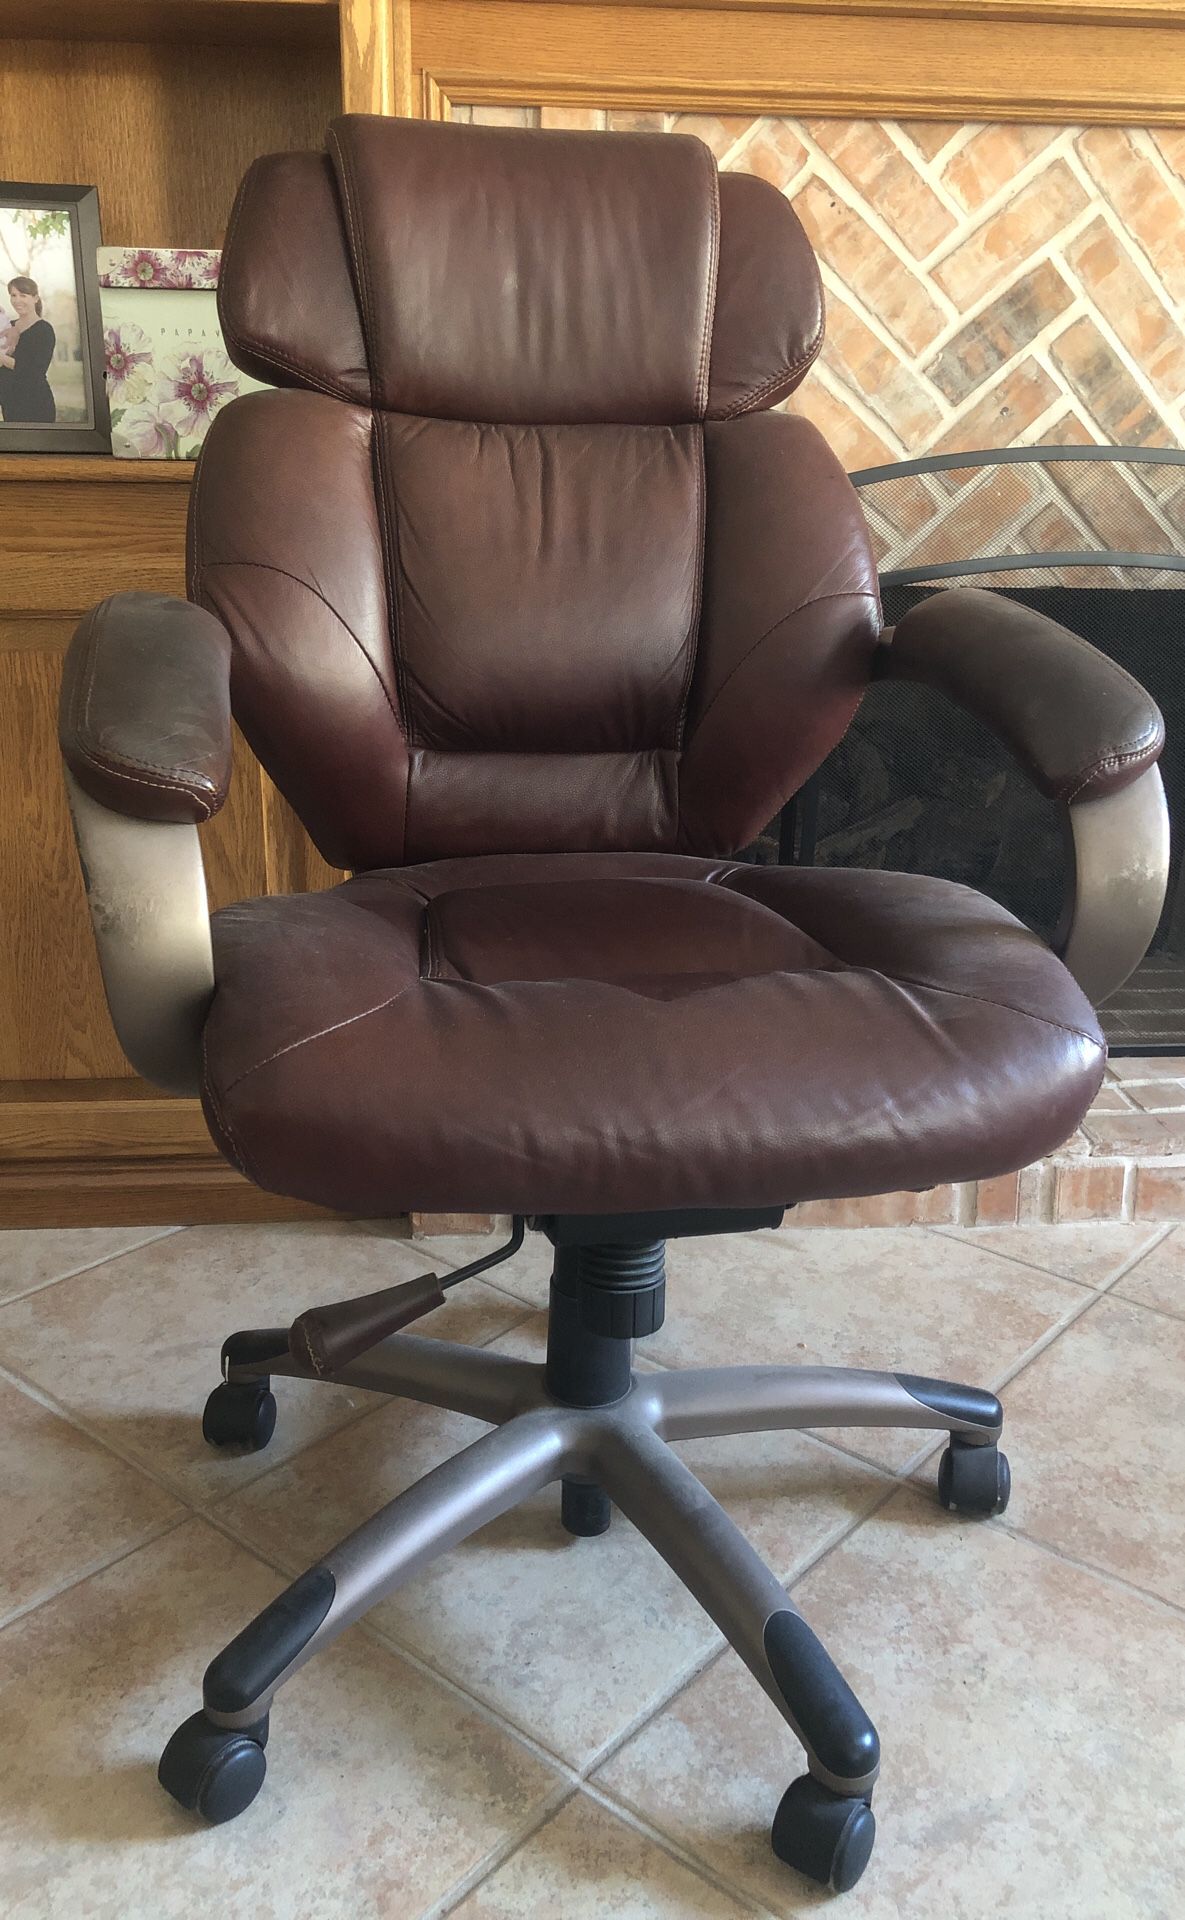 Lane Executive Rolling Chair Brown Leather for Sale in Lake Forest, CA -  OfferUp